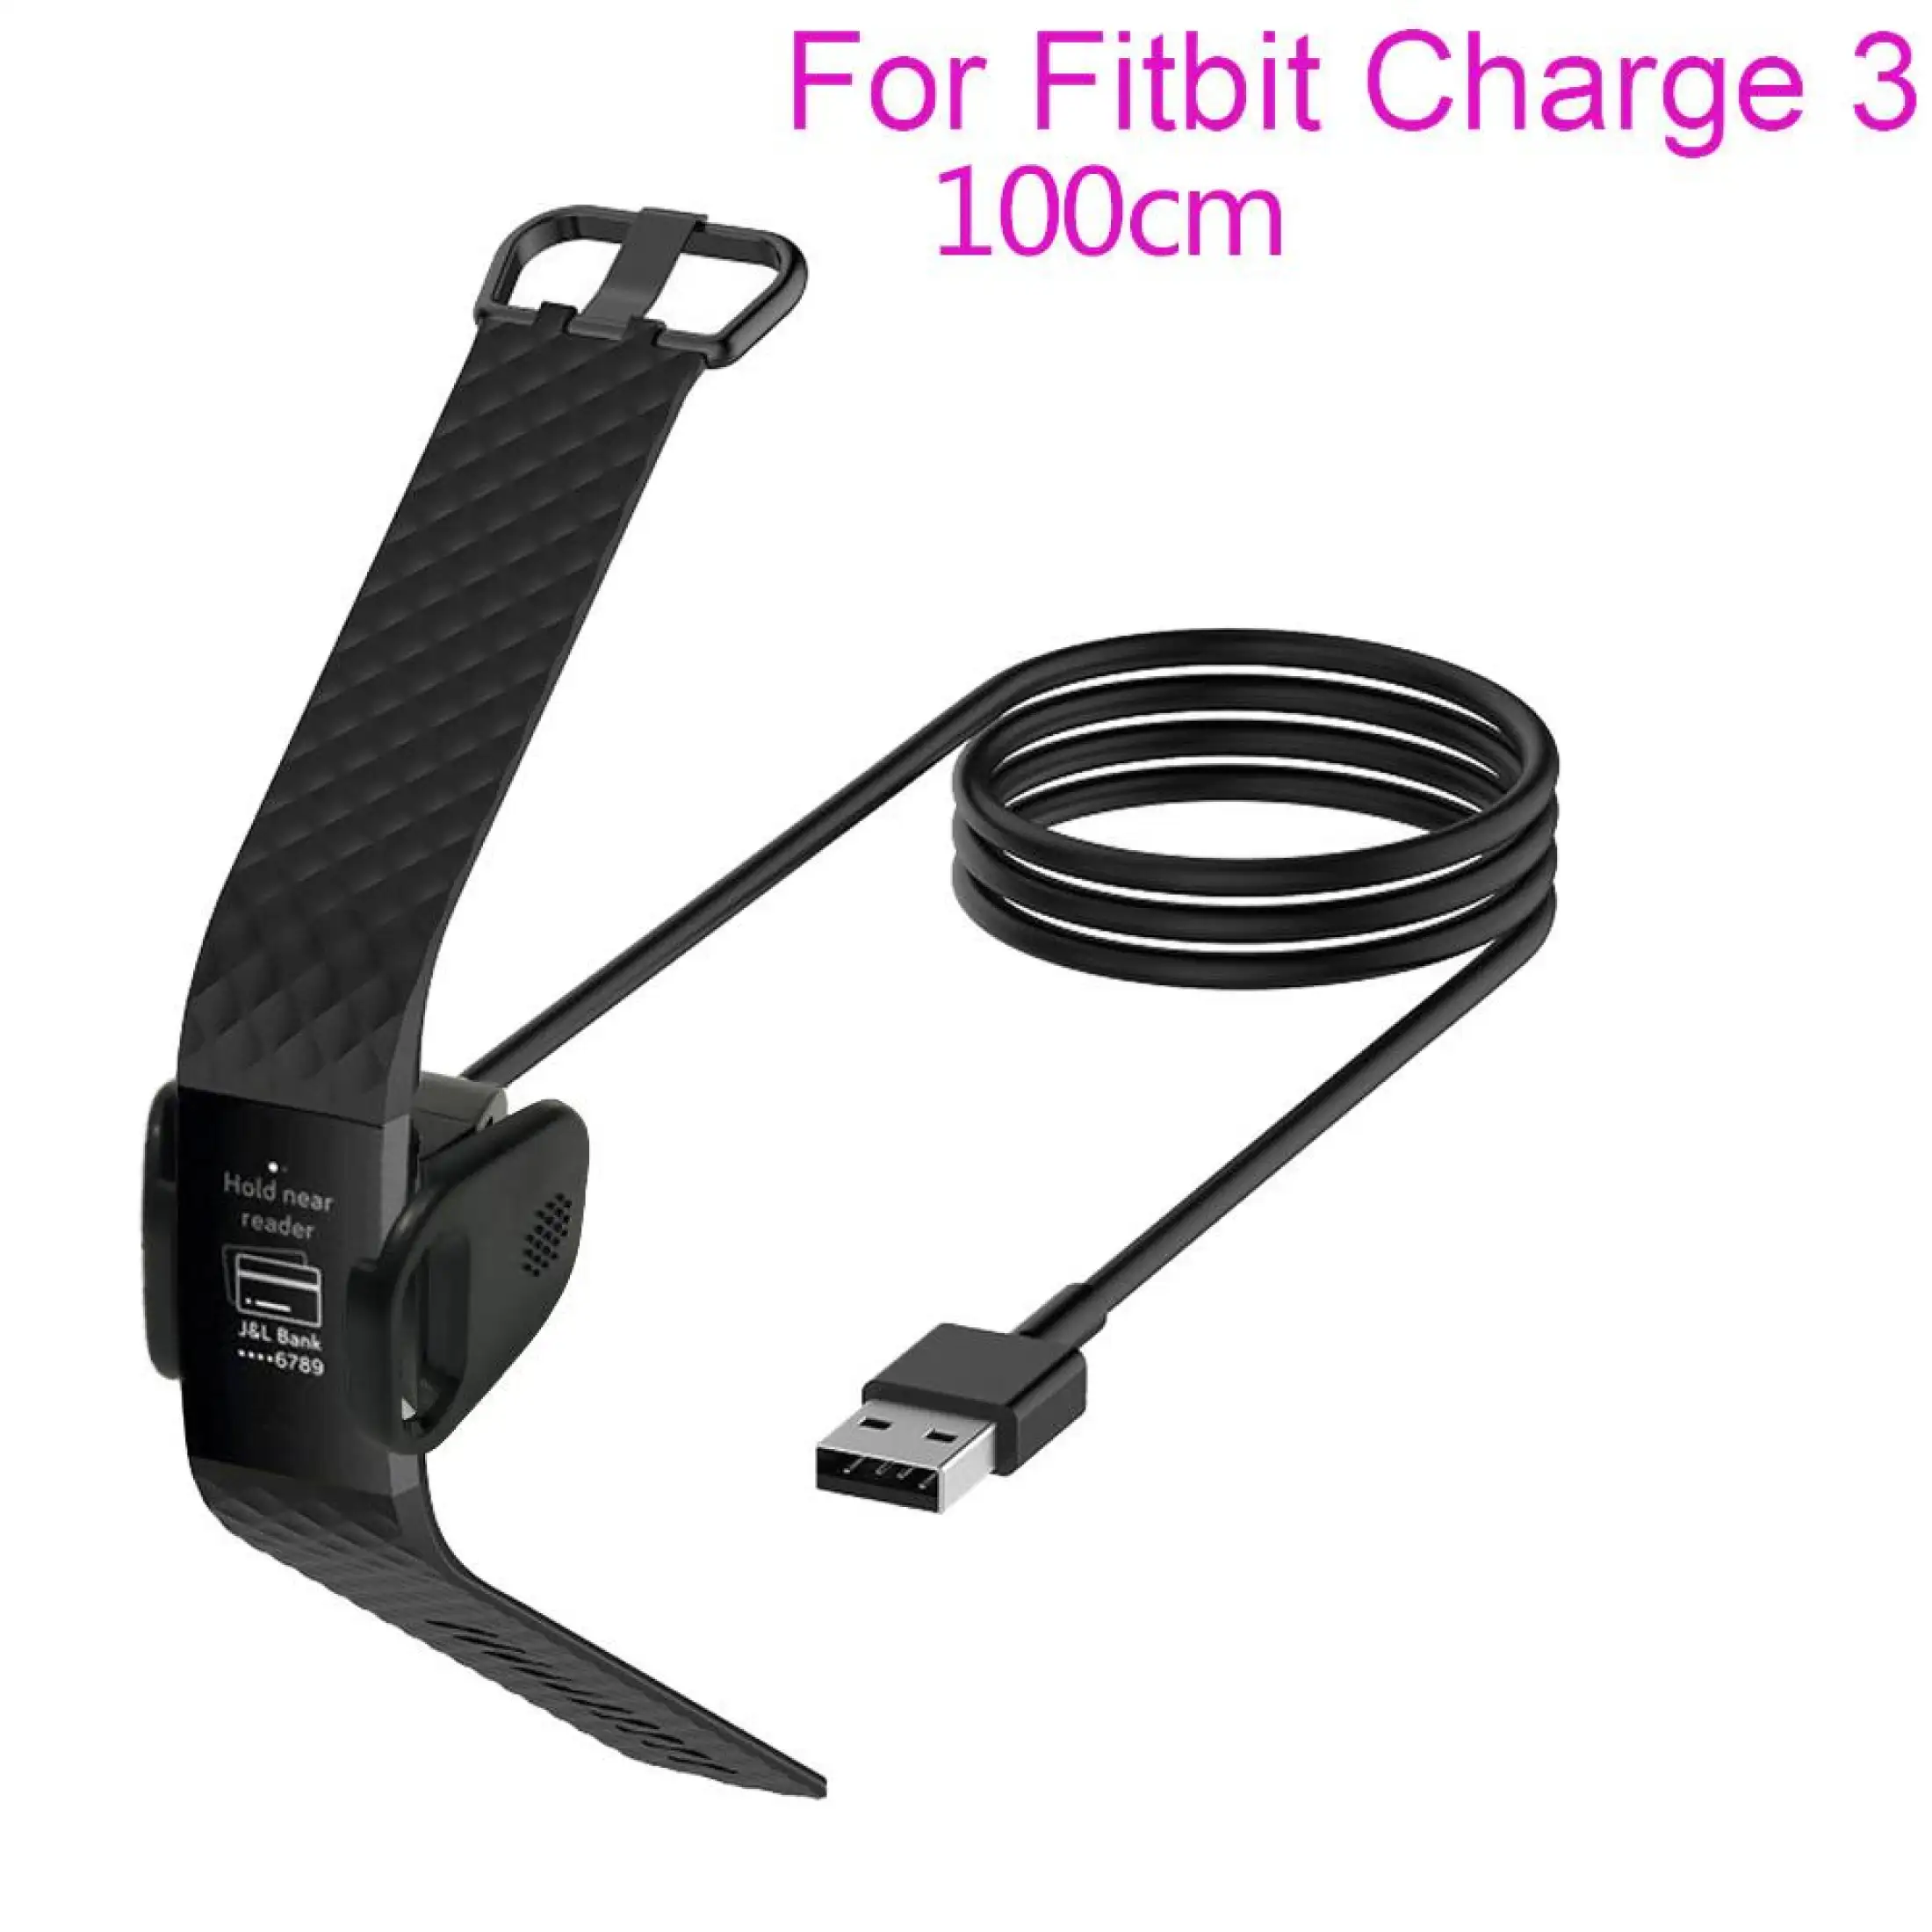 fitbit charge 3 charger not working